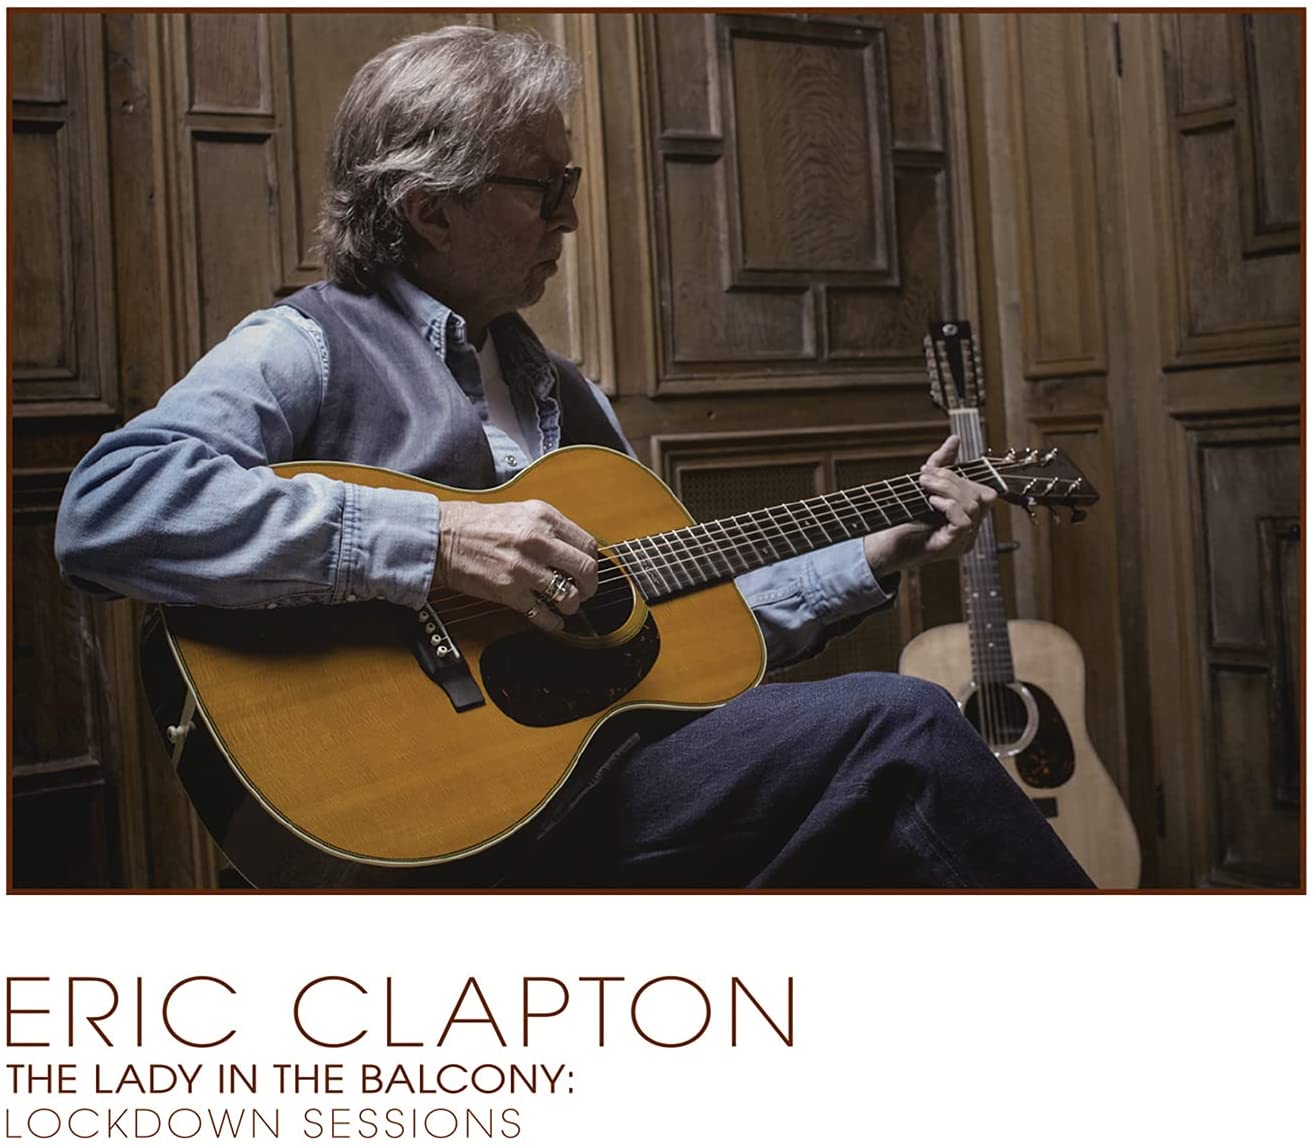 ERIC CLAPTON - The Lady In the Balcony: The Lockdown Sessions